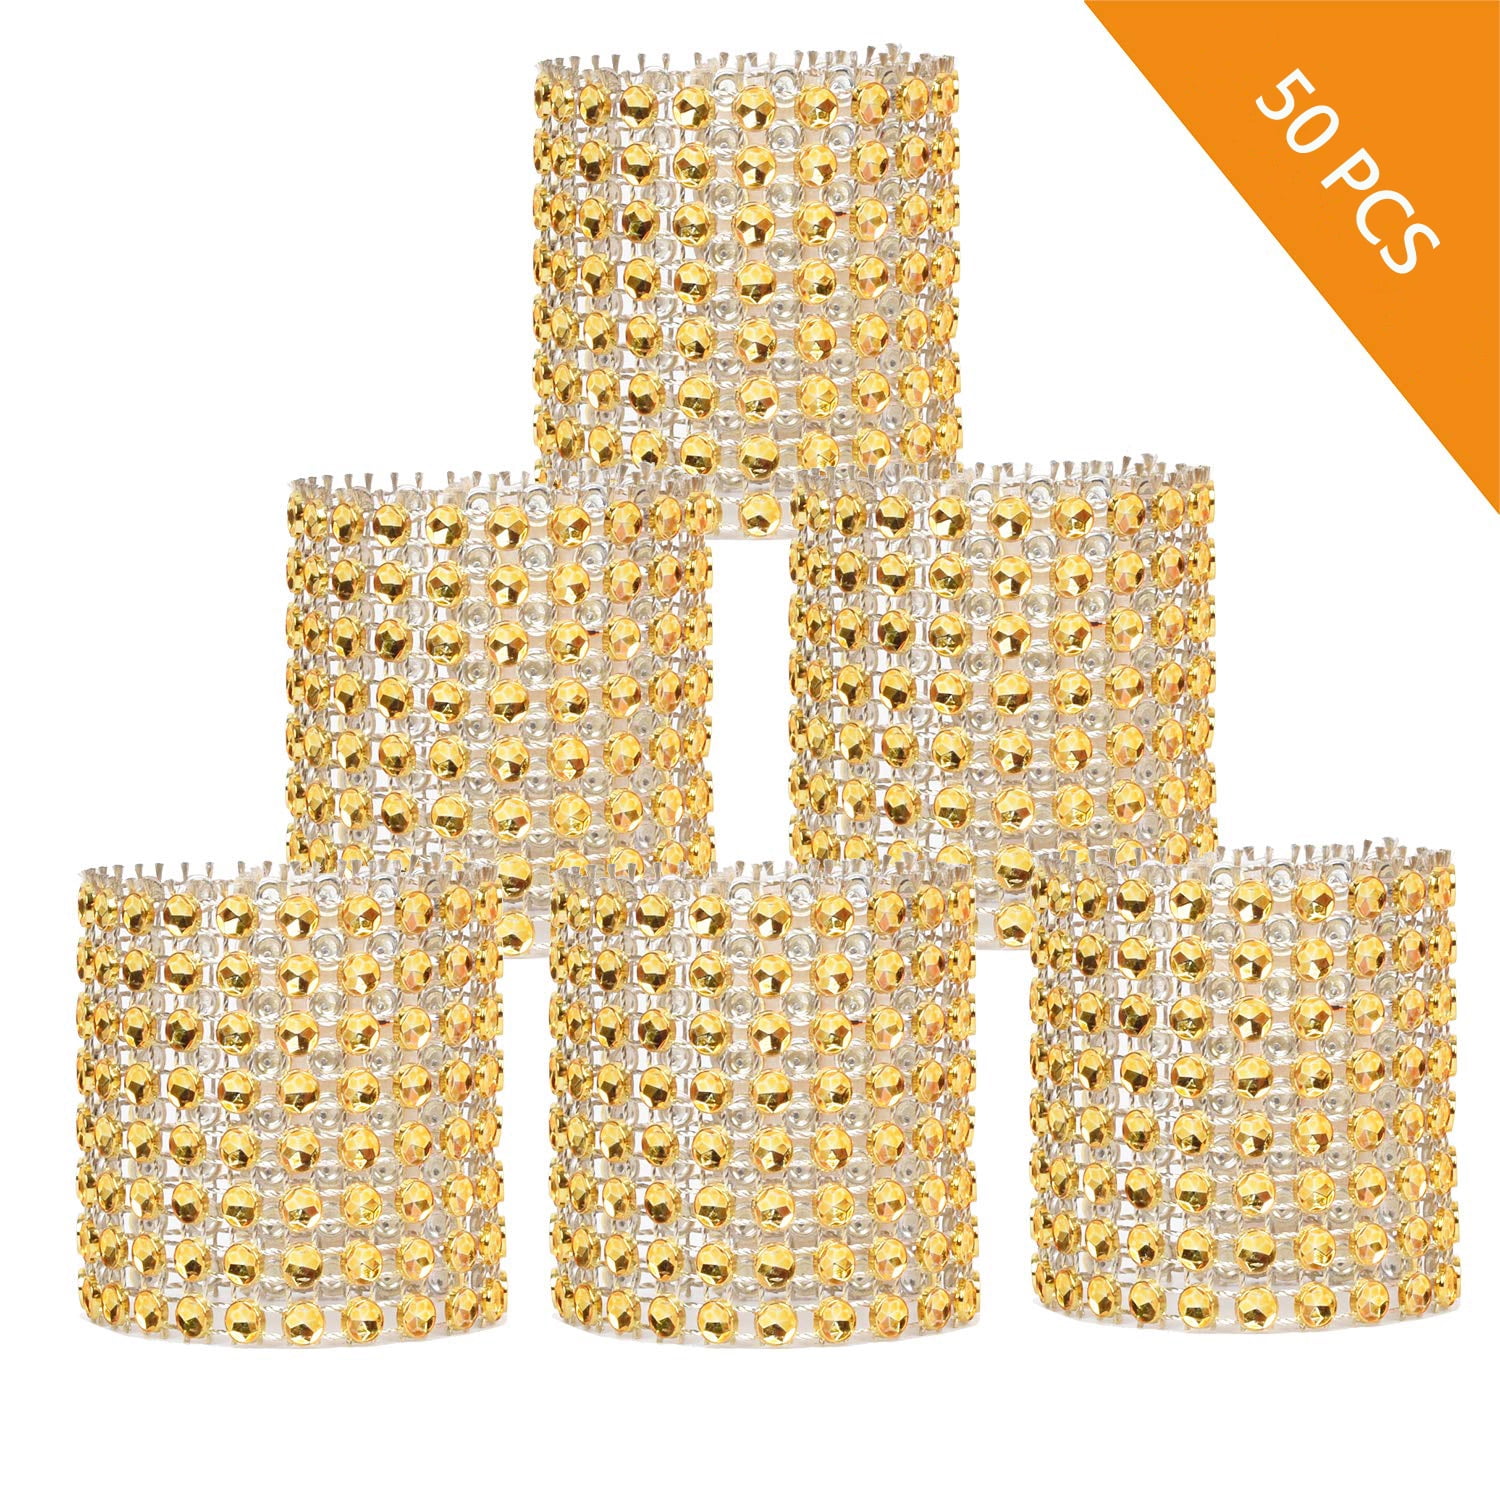 Silver Gold Serviette Buckle Holder for Xmas Wedding Décor Pearls Napkin Rings Buckles Dinner Party Family Gathering Gold-8 PCS